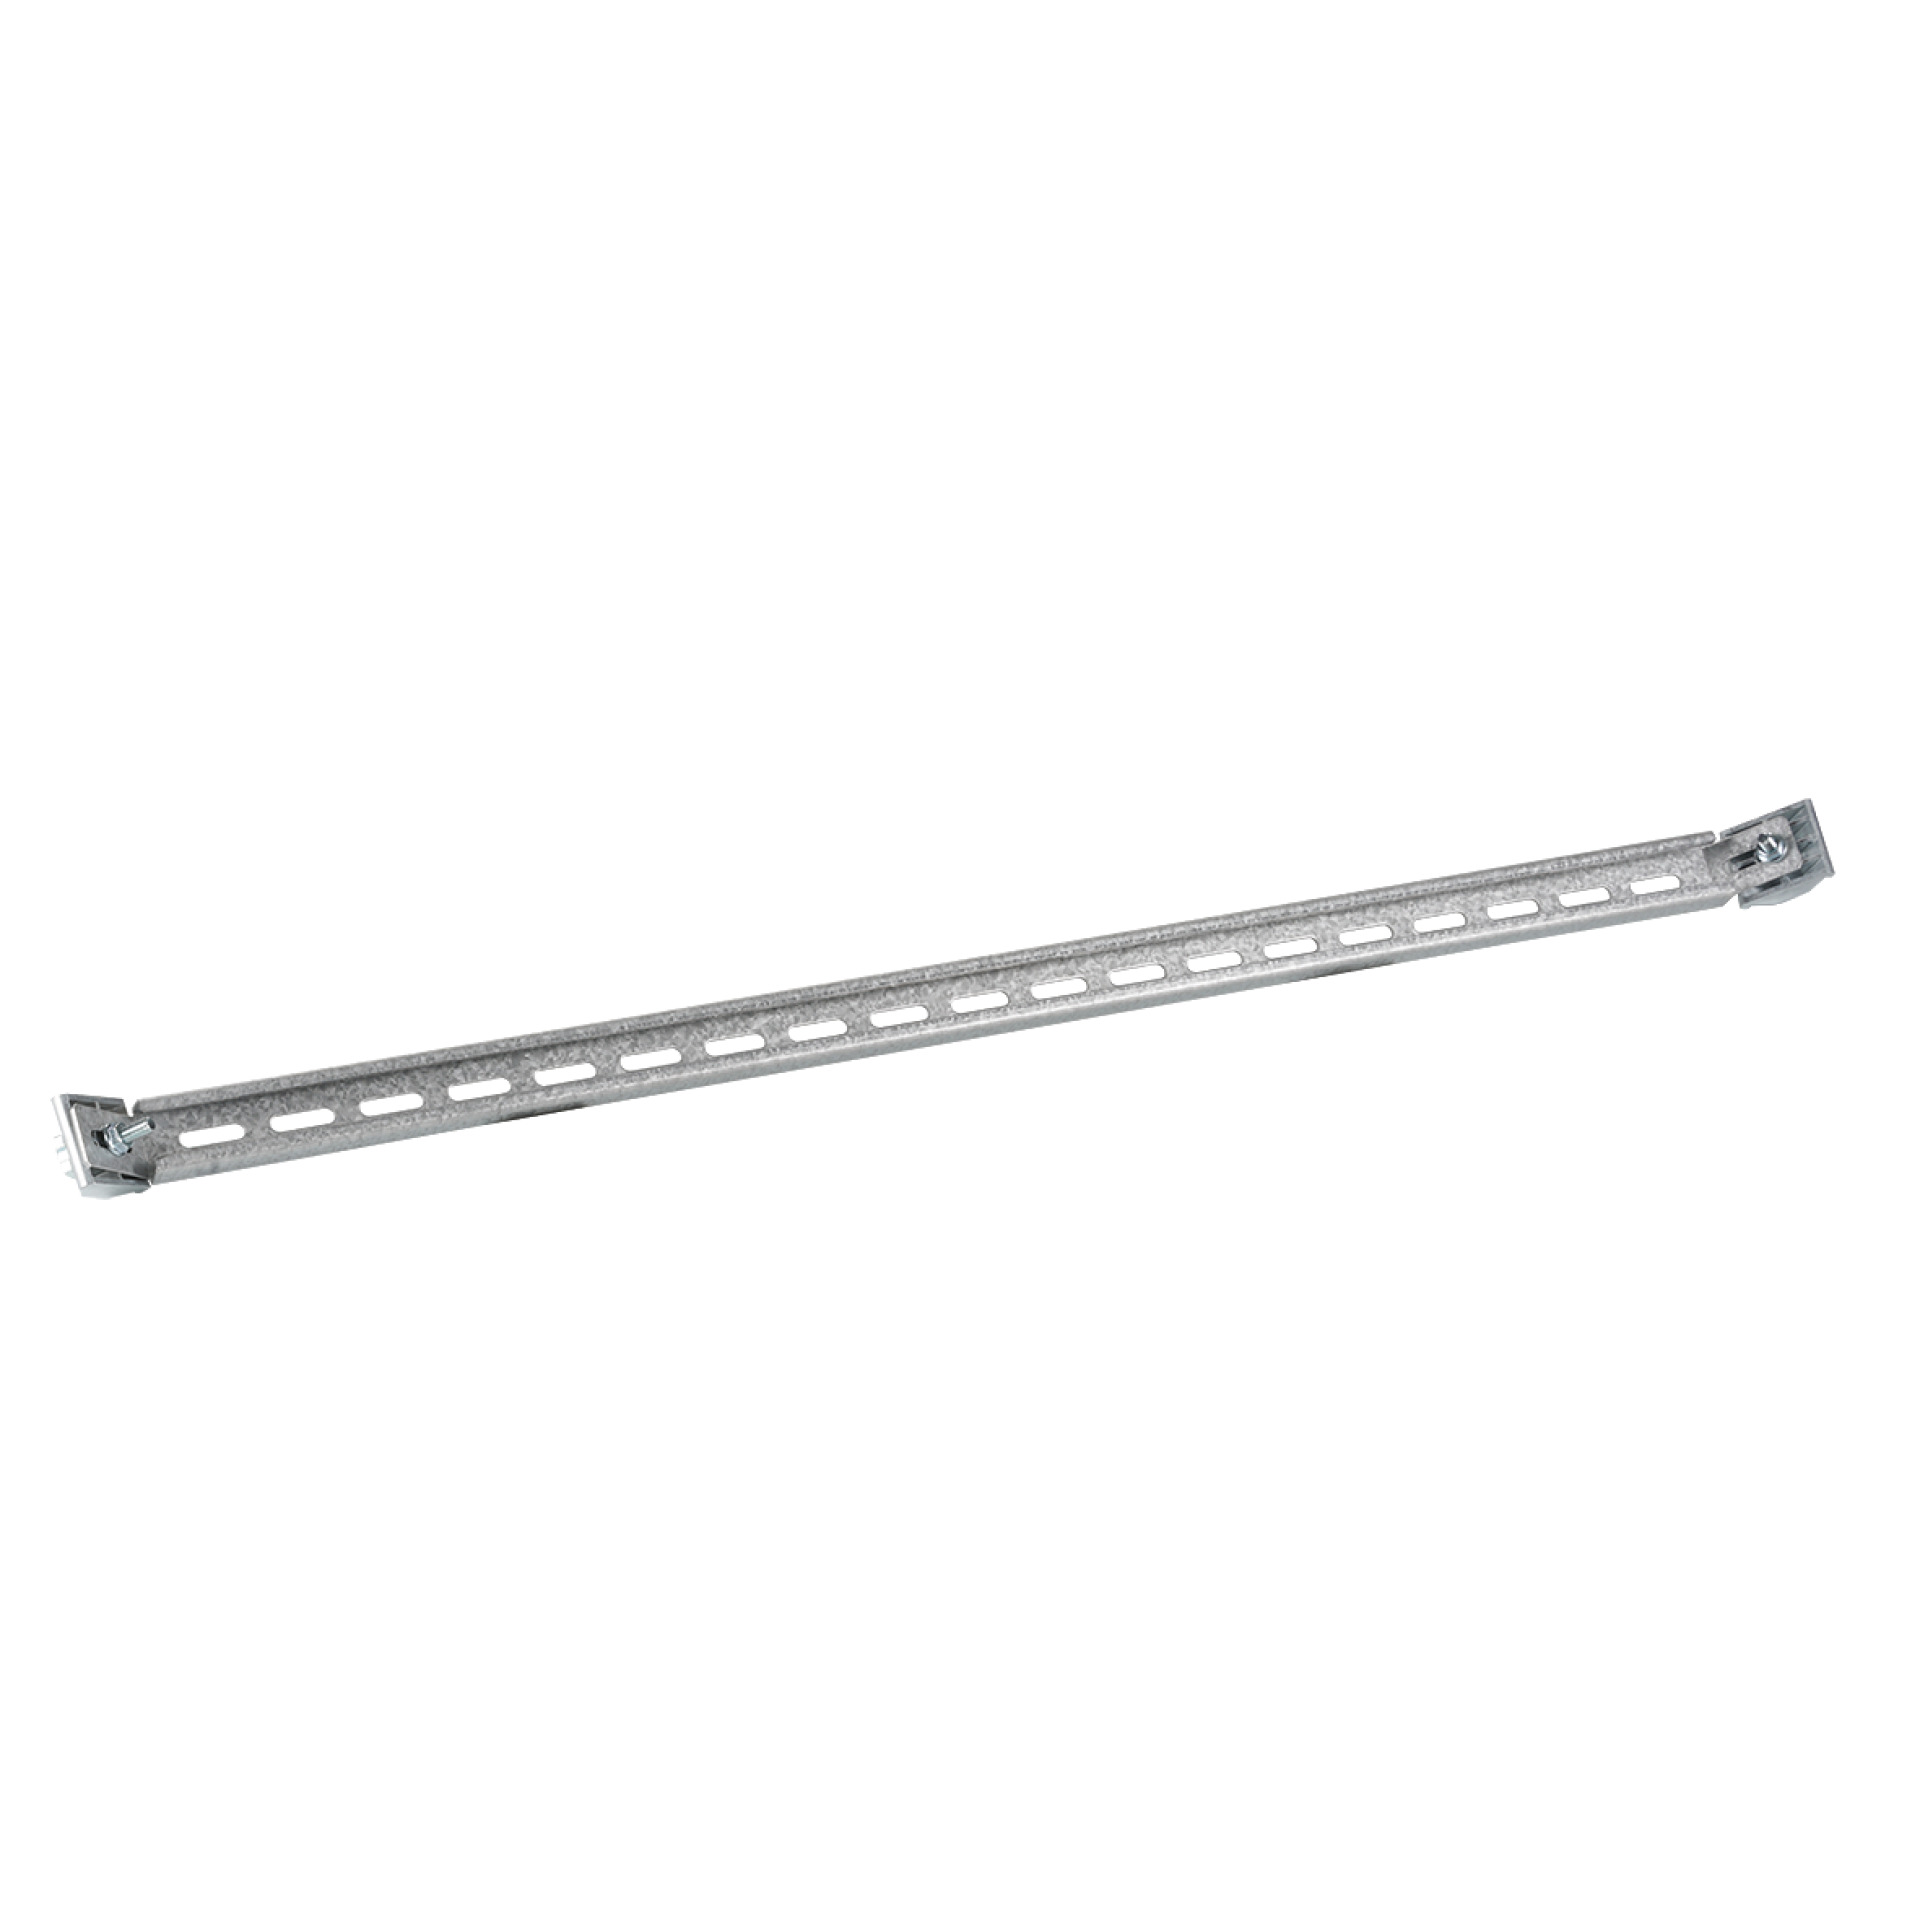 C Profile Rail for Cable Clamping, D=600 mm